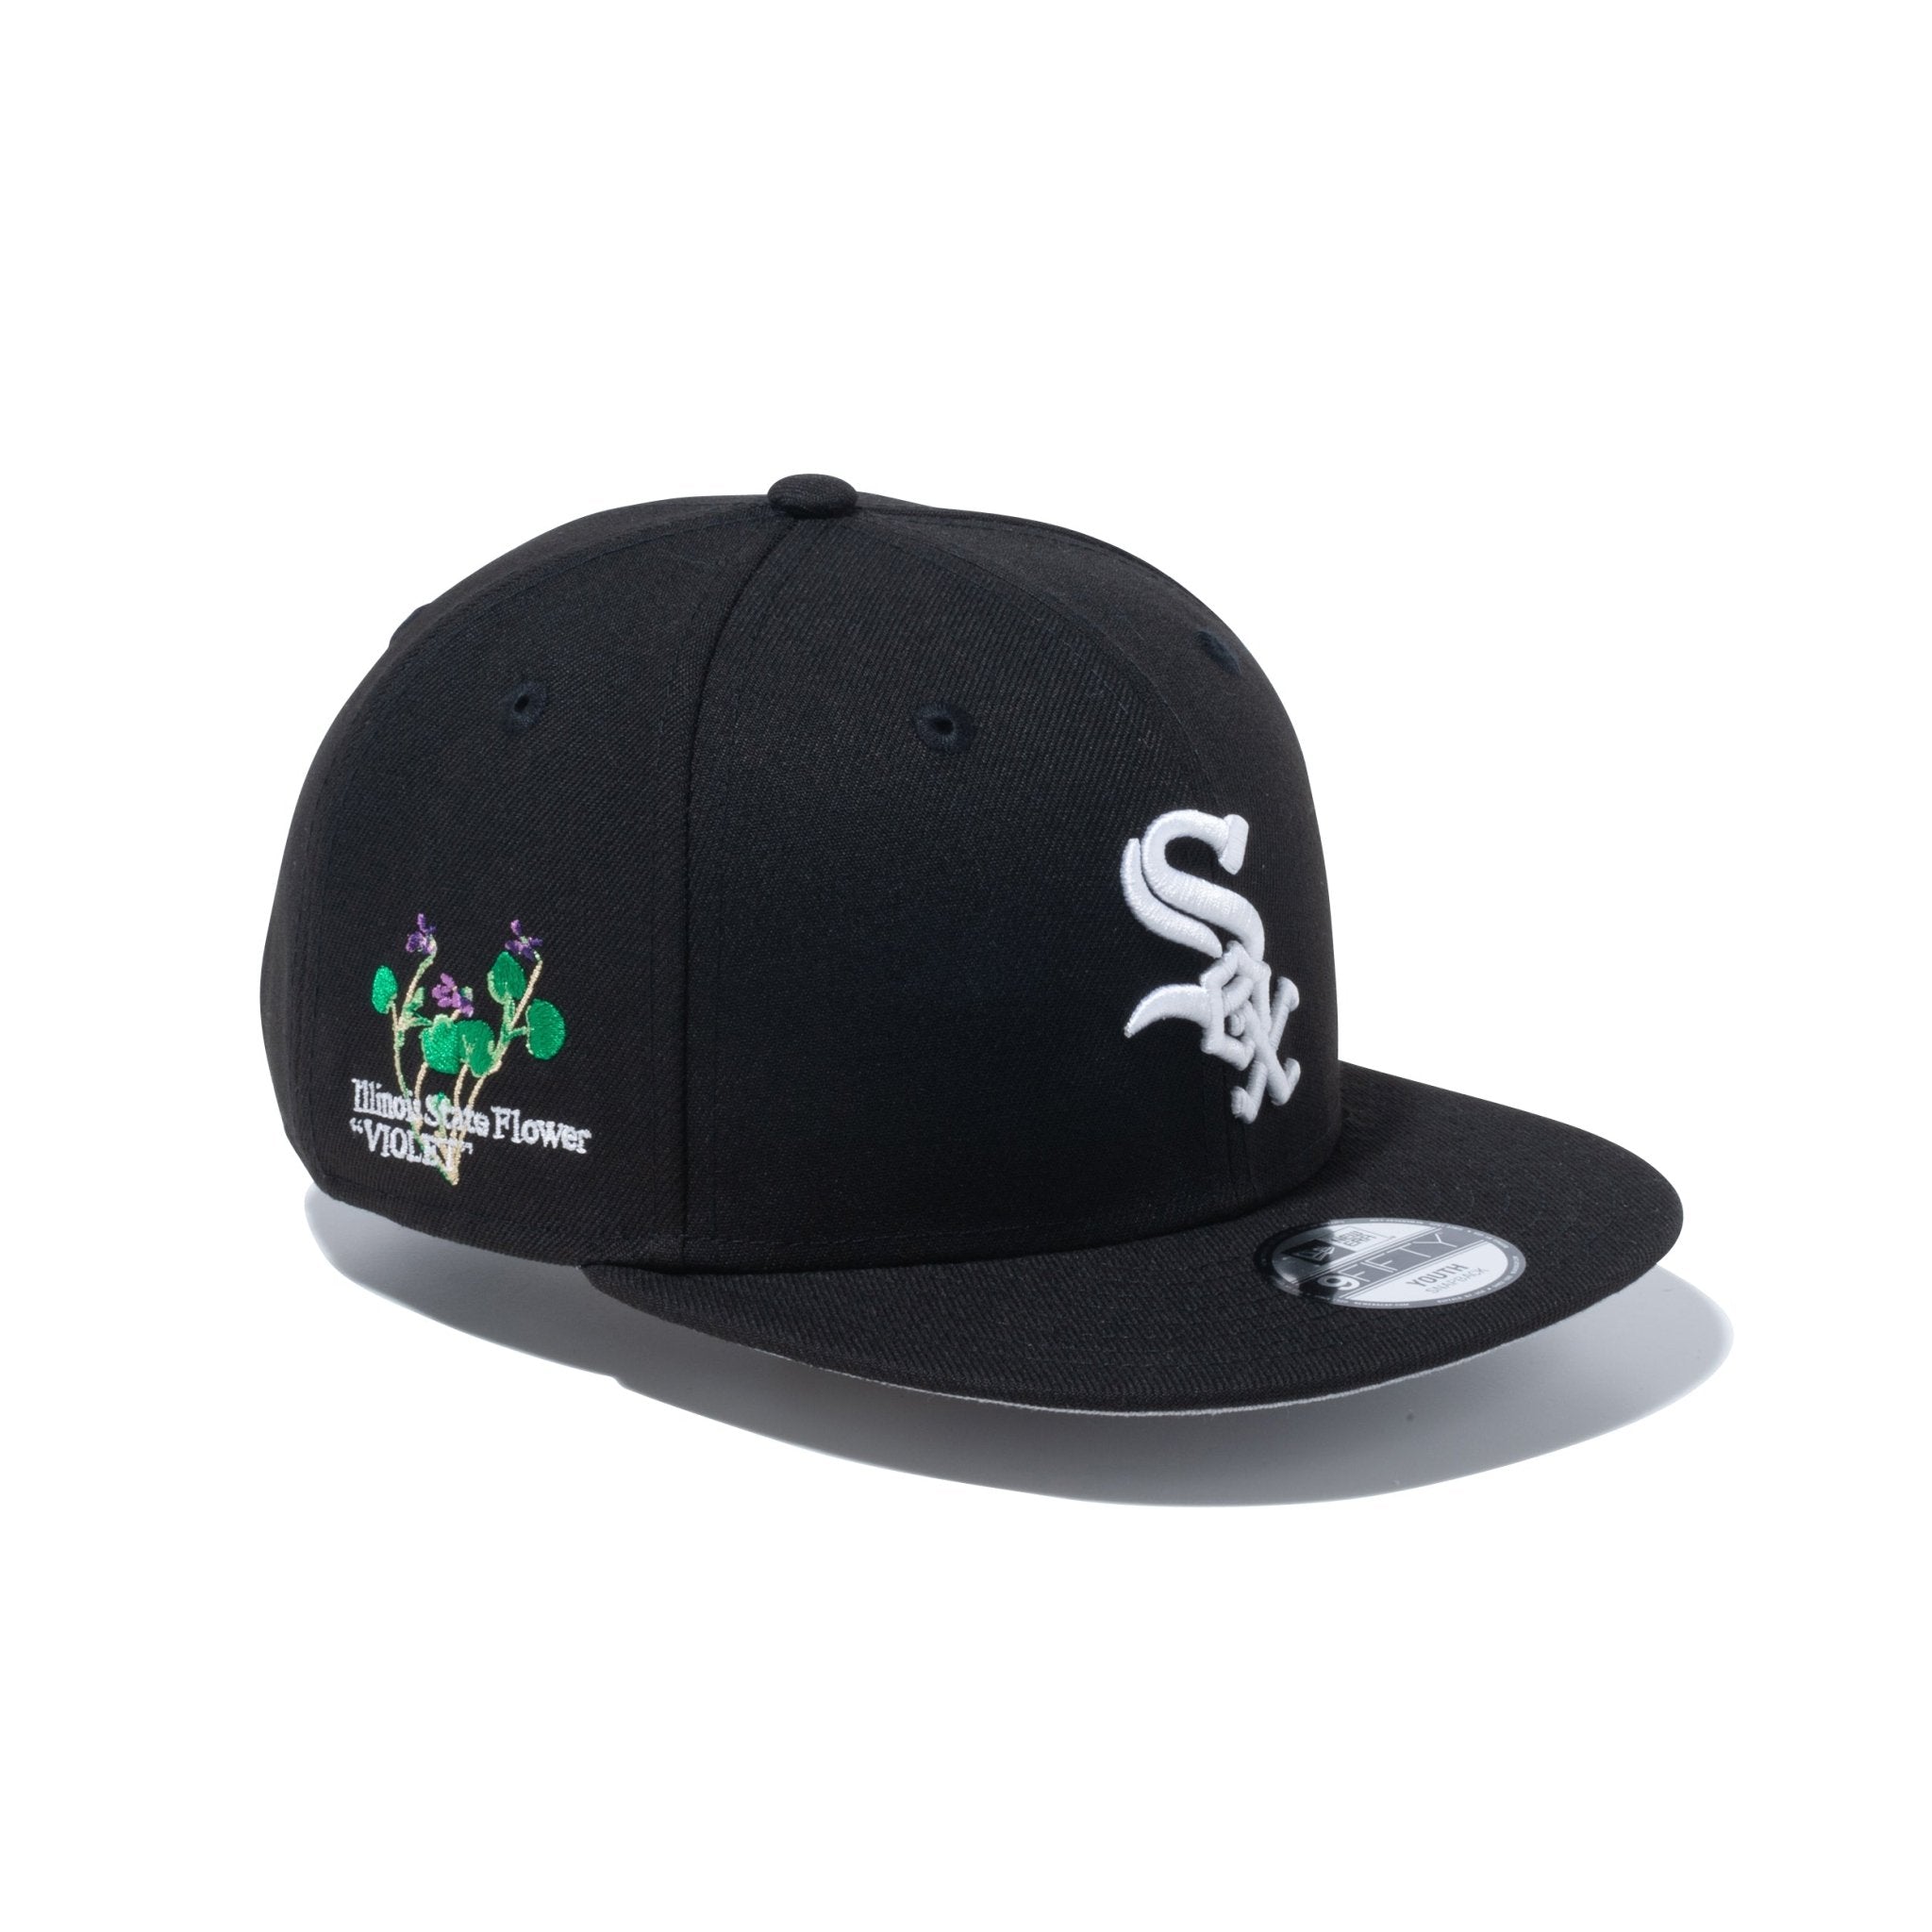 Youth 9FIFTY MLB State Flowers シカゴ・ホワイトソックス 